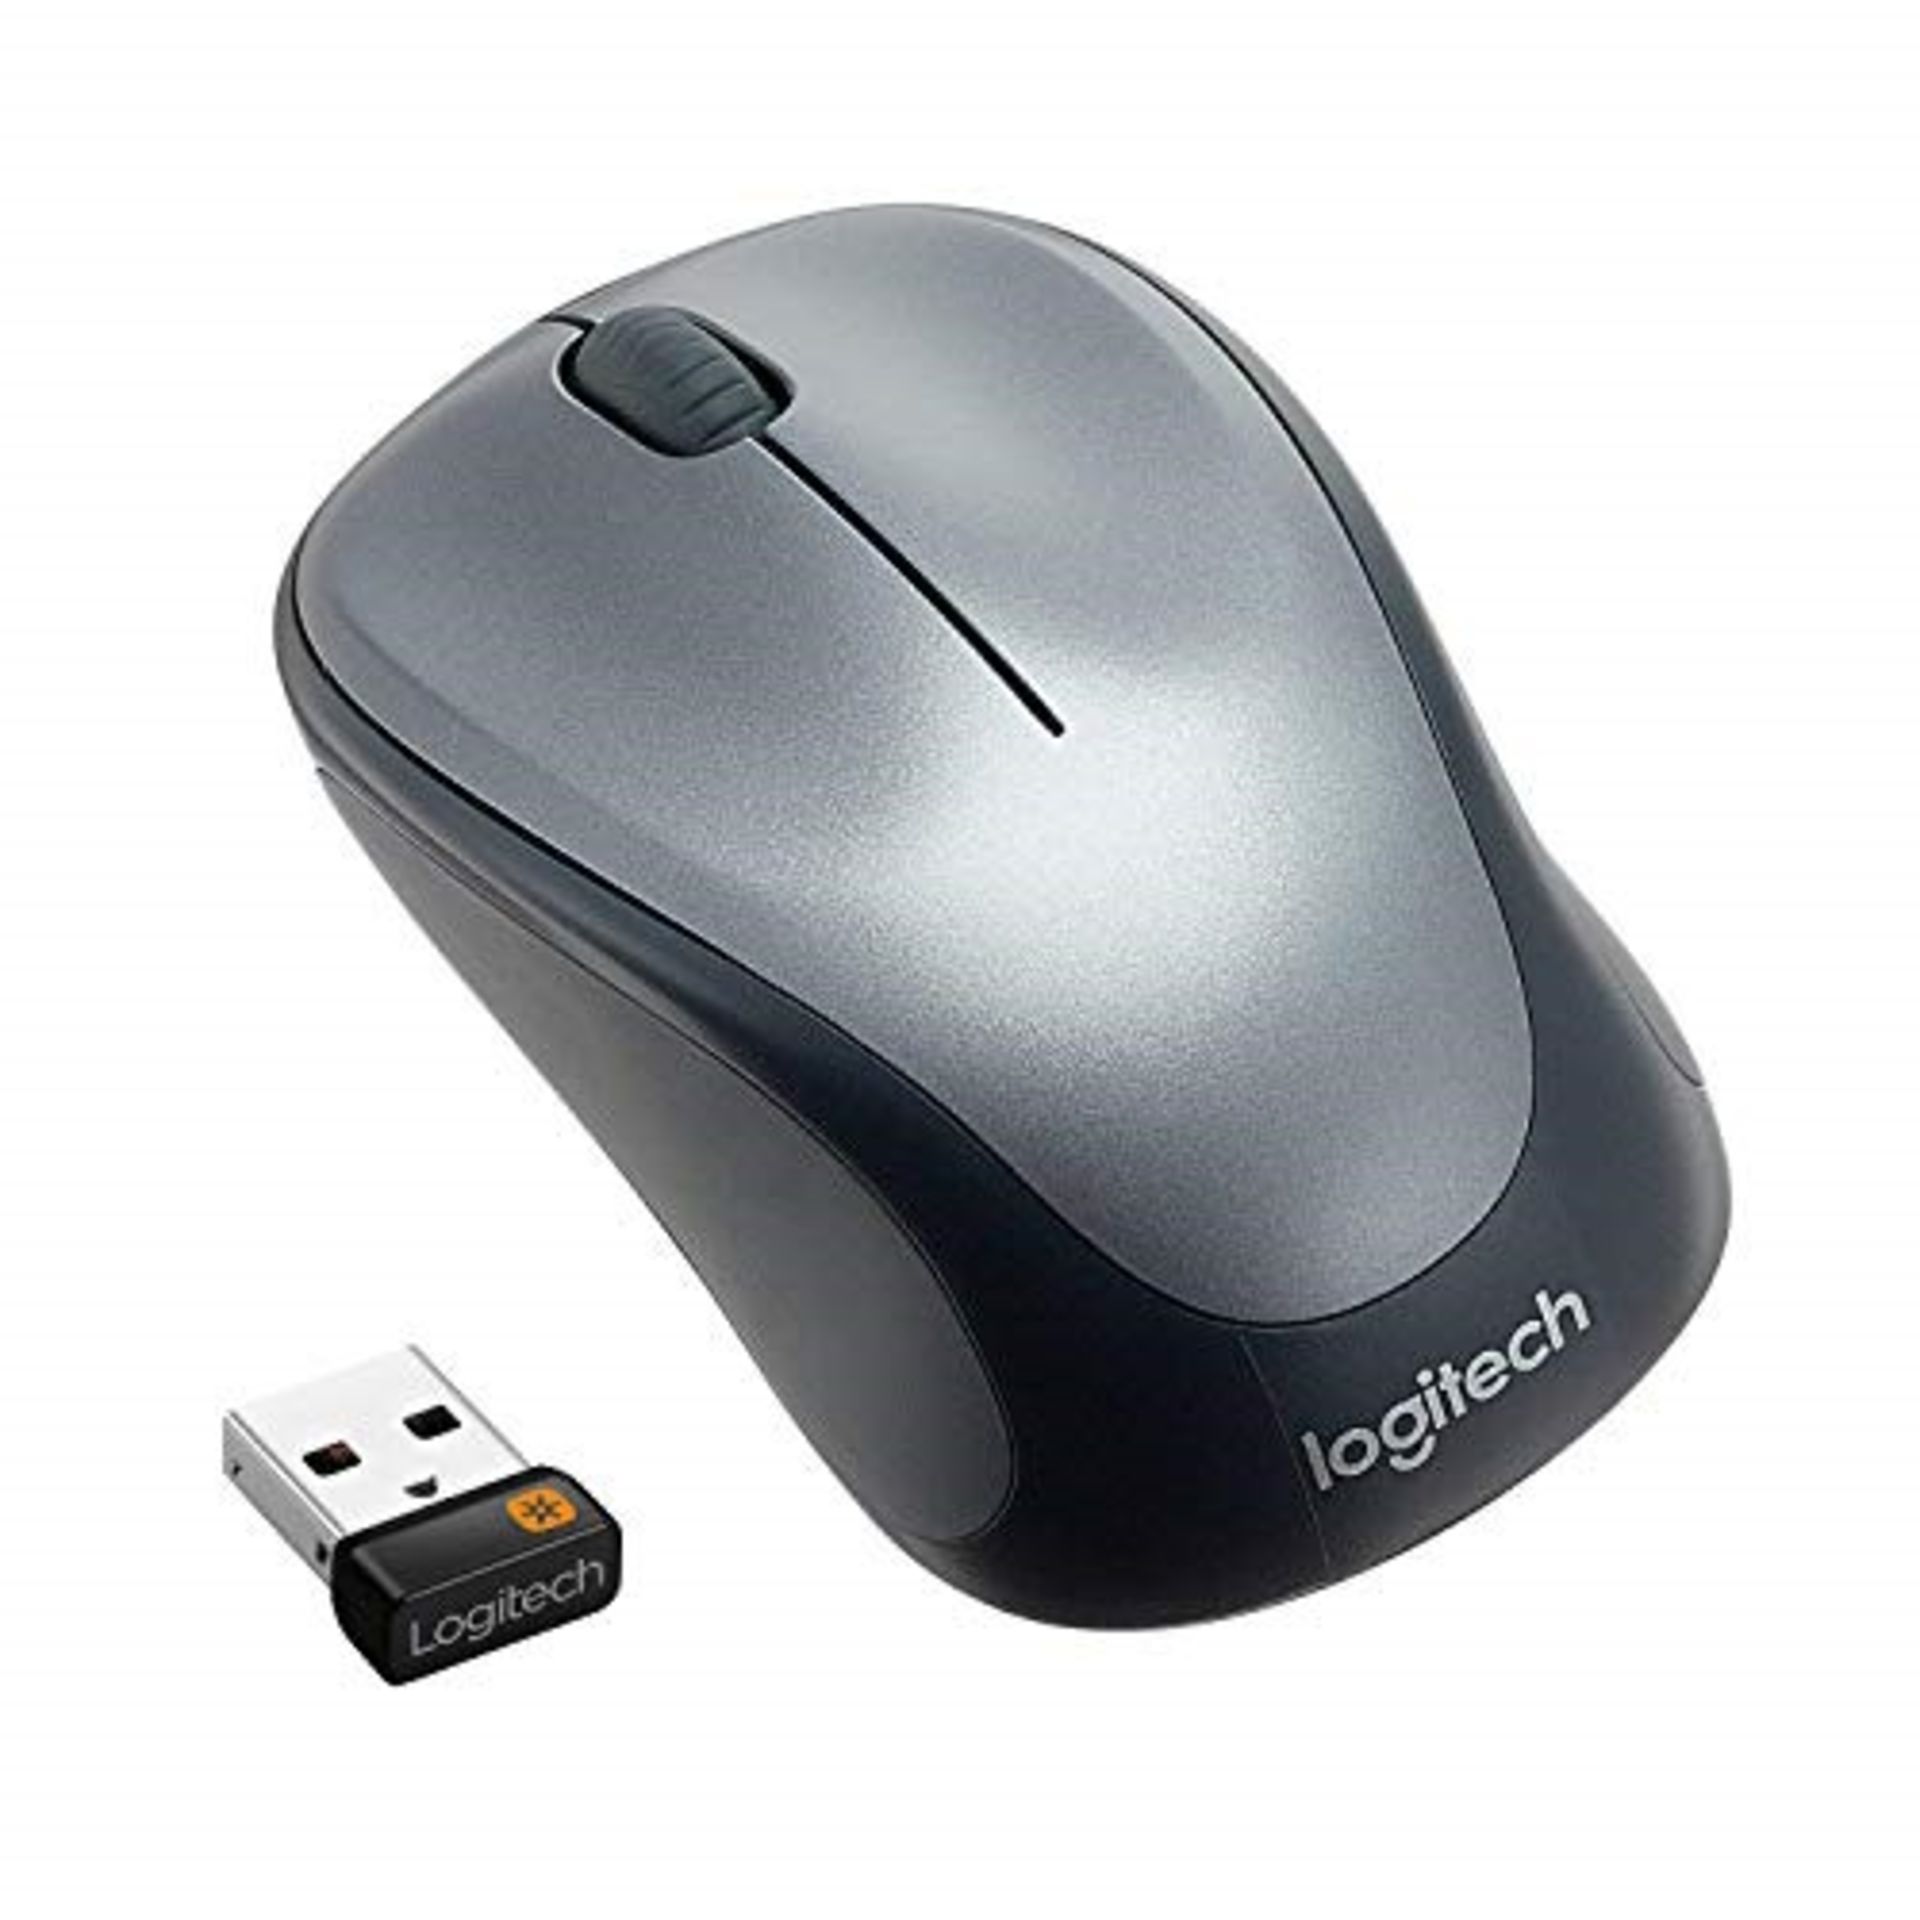 Logitech M235 Wireless Mouse, 2.4 GHz with USB Unifying Receiver, 1000 DPI Optical Tra